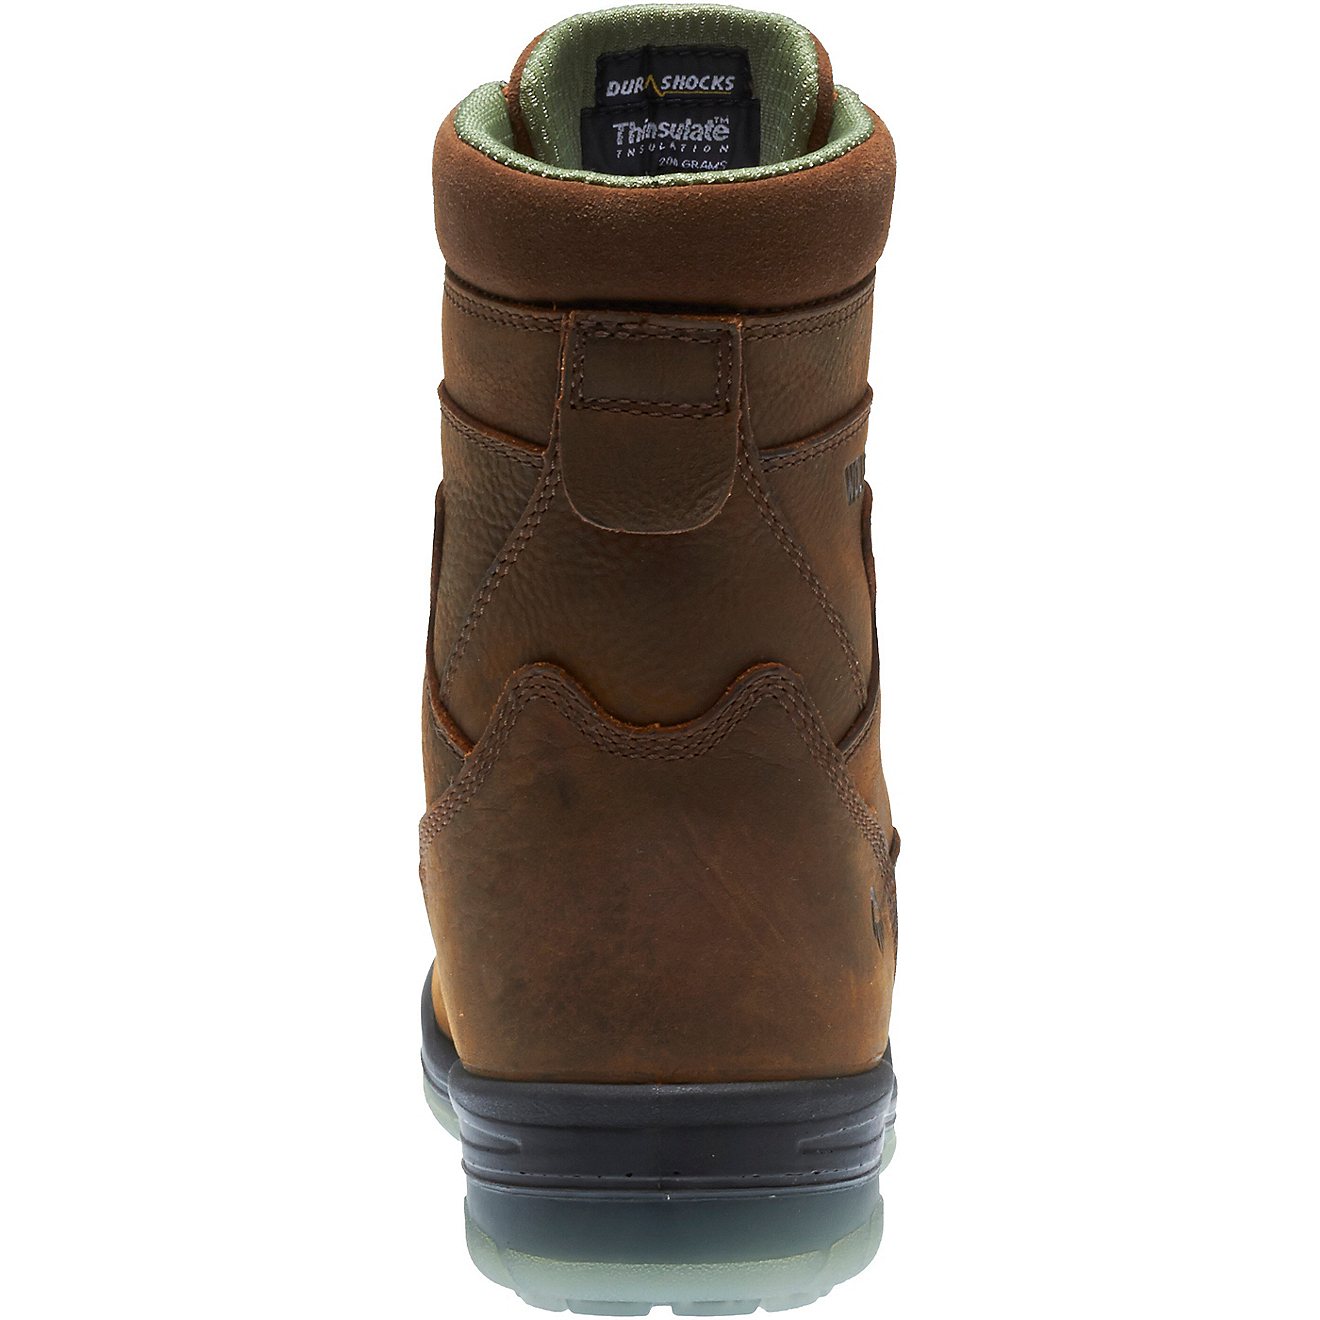 Wolverine Men's DuraShocks Insulated Insulated Steel Toe 8 in Work Boots                                                         - view number 5